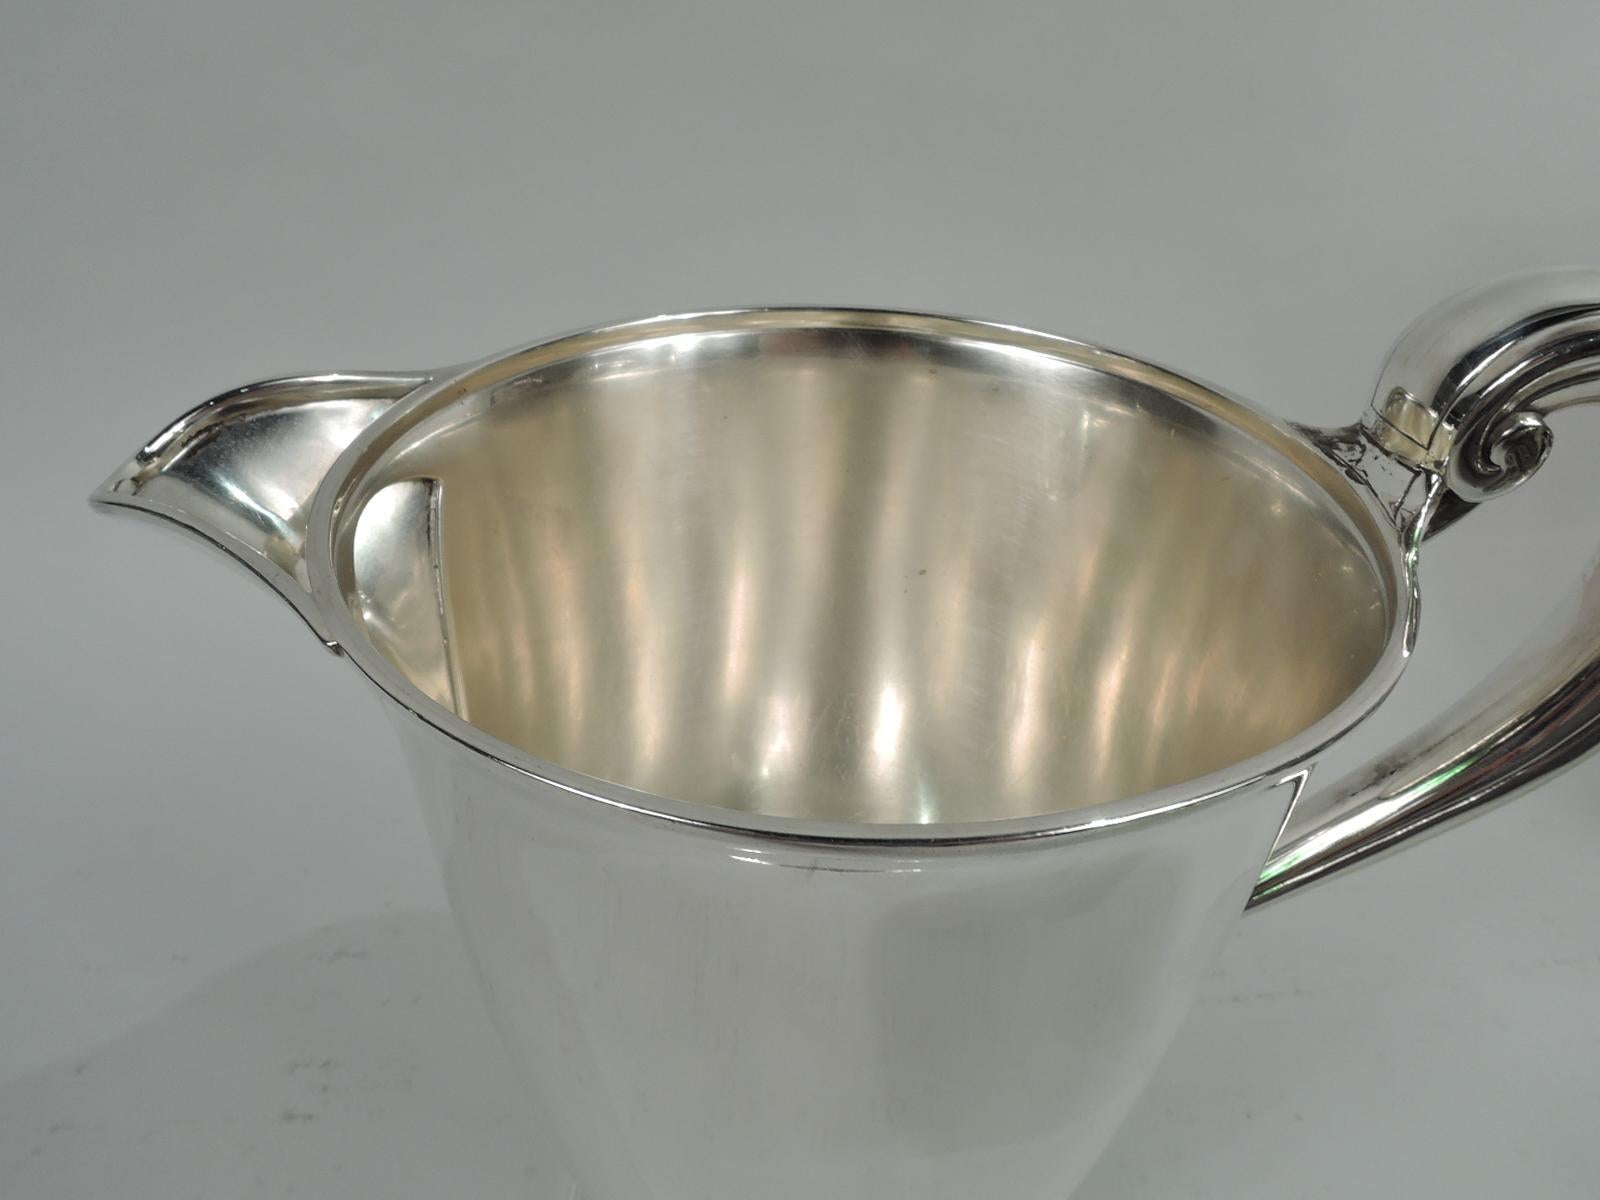 Super stylish Modern sterling silver water pitcher. Made by Tiffany & Co. in New York, ca 1912. Tapering bowl on round and stepped foot. High-looping handle and v-spout with ice guard. Fully marked including maker’s stamp, pattern no. 18214 (first